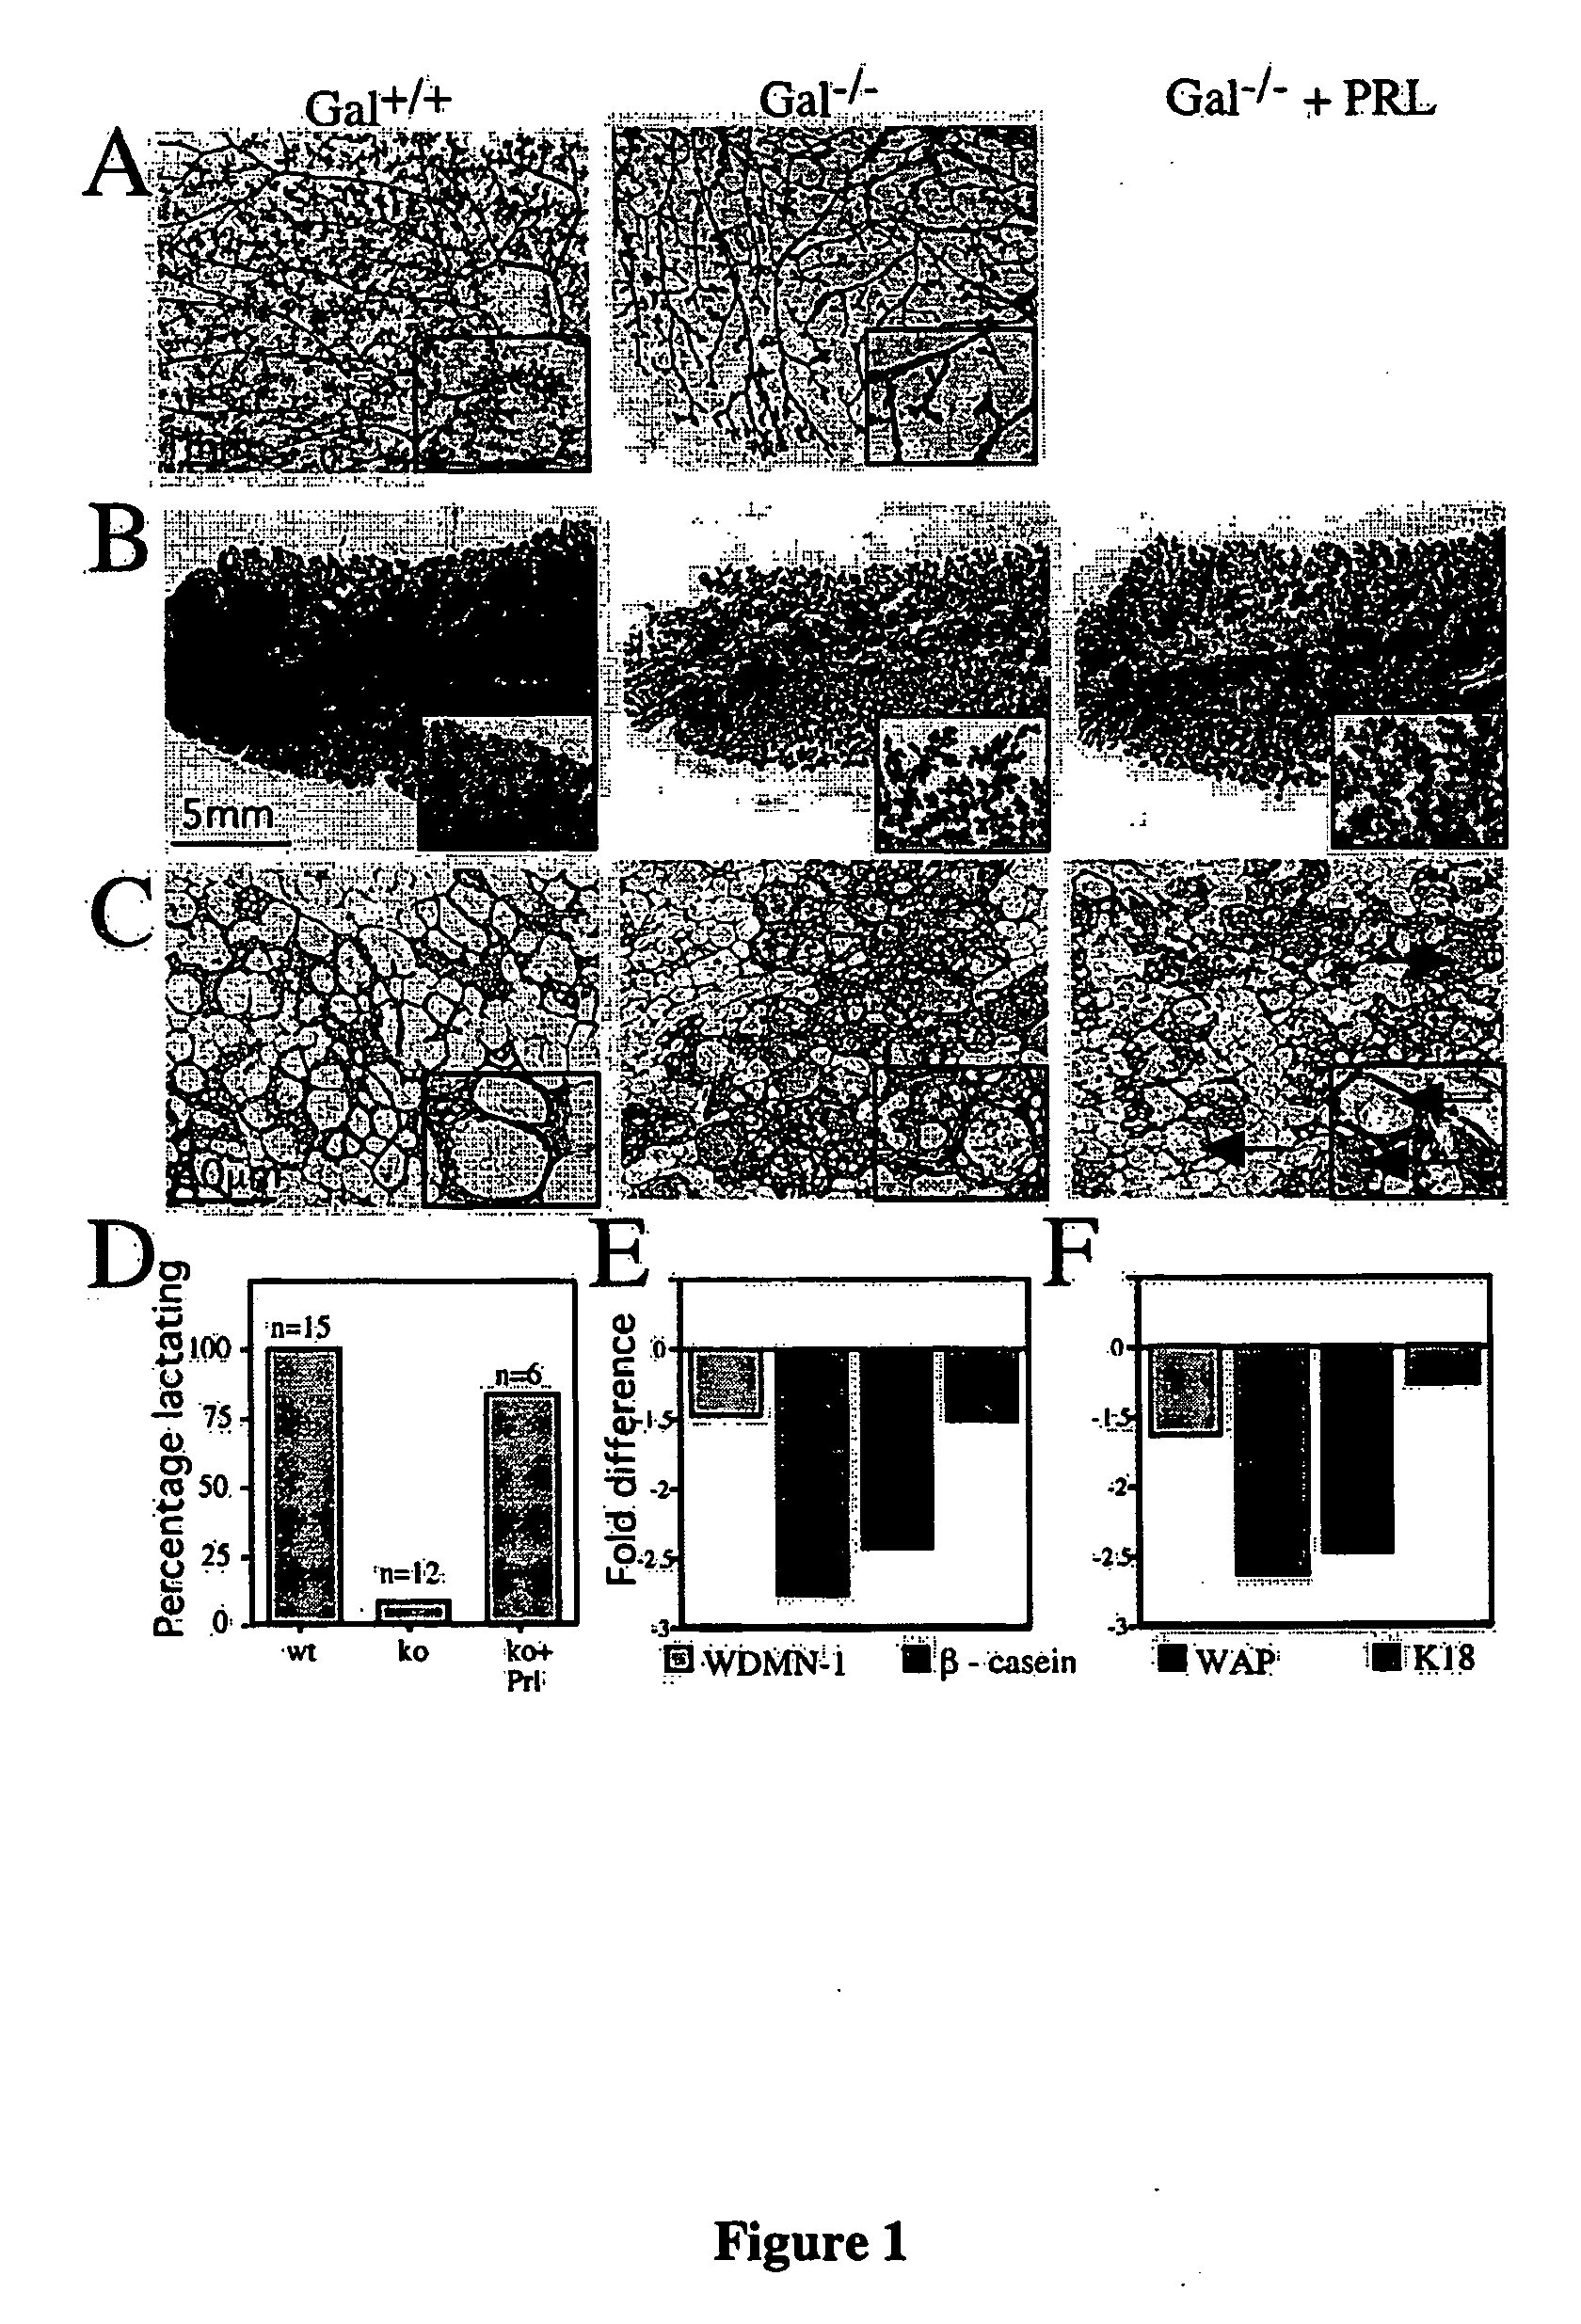 Method for Inducing Mammary Epithelial Cell Differentiation